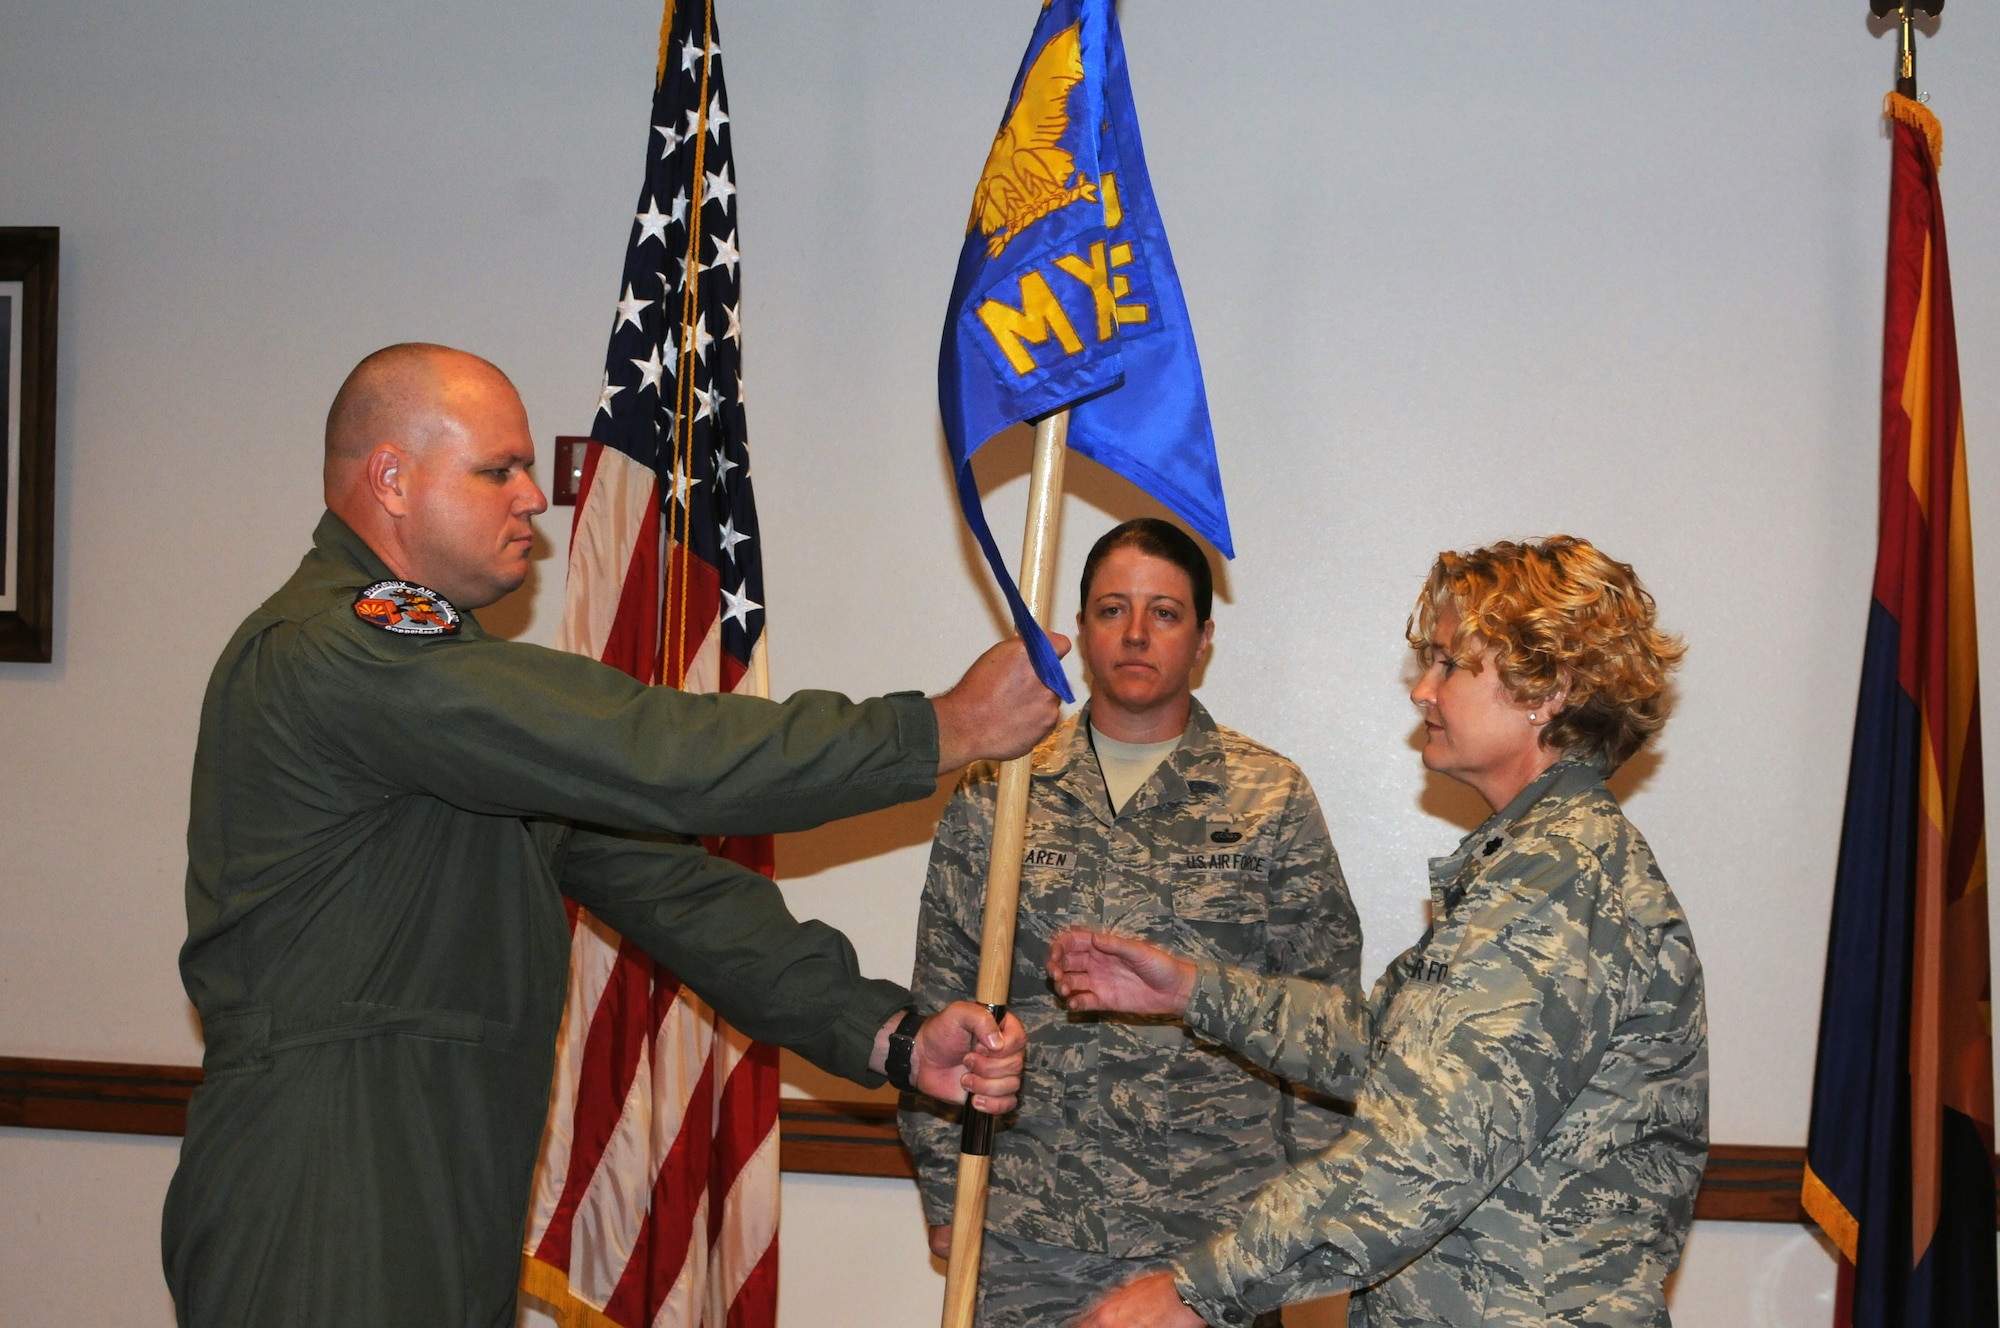 In a ceremony presided over by Col. Gary Brewer Jr., 161st Maintenance Group commander, Lt. Col. Aimee Storm assumed command of the 161st Maintenance Squadron.

Colonel Storm recently concluded an active duty tour in Germany where she served as an Operational Decision Support officer at United States European Command and the Force Support Squadron commander at the 52nd Fighter Wing at Spangdahlem Air Base, Germany. 

After enlisting in June 1990 into a consolidated air maintenance squadron in the Ohio Air National Guard as a munitions systems specialist, she transferred to the Colorado Air National Guard and became additionally qualified in munitions operations. In 1993, she transferred to the Arizona Air National Guard and commissioned as a personnel officer at the 161st Air Refueling Wing in 1995. 

Colonel Storm’s officer assignments also include services flight commander, homeland security coordinator, and military personnel management officer. 

“For many years I have wanted to get back into maintenance.” Colonel Storm said. “To me, this assignment is like coming home.”
(U.S. Air Force photo by Tech. Sgt. Susan Gladstein/Released)